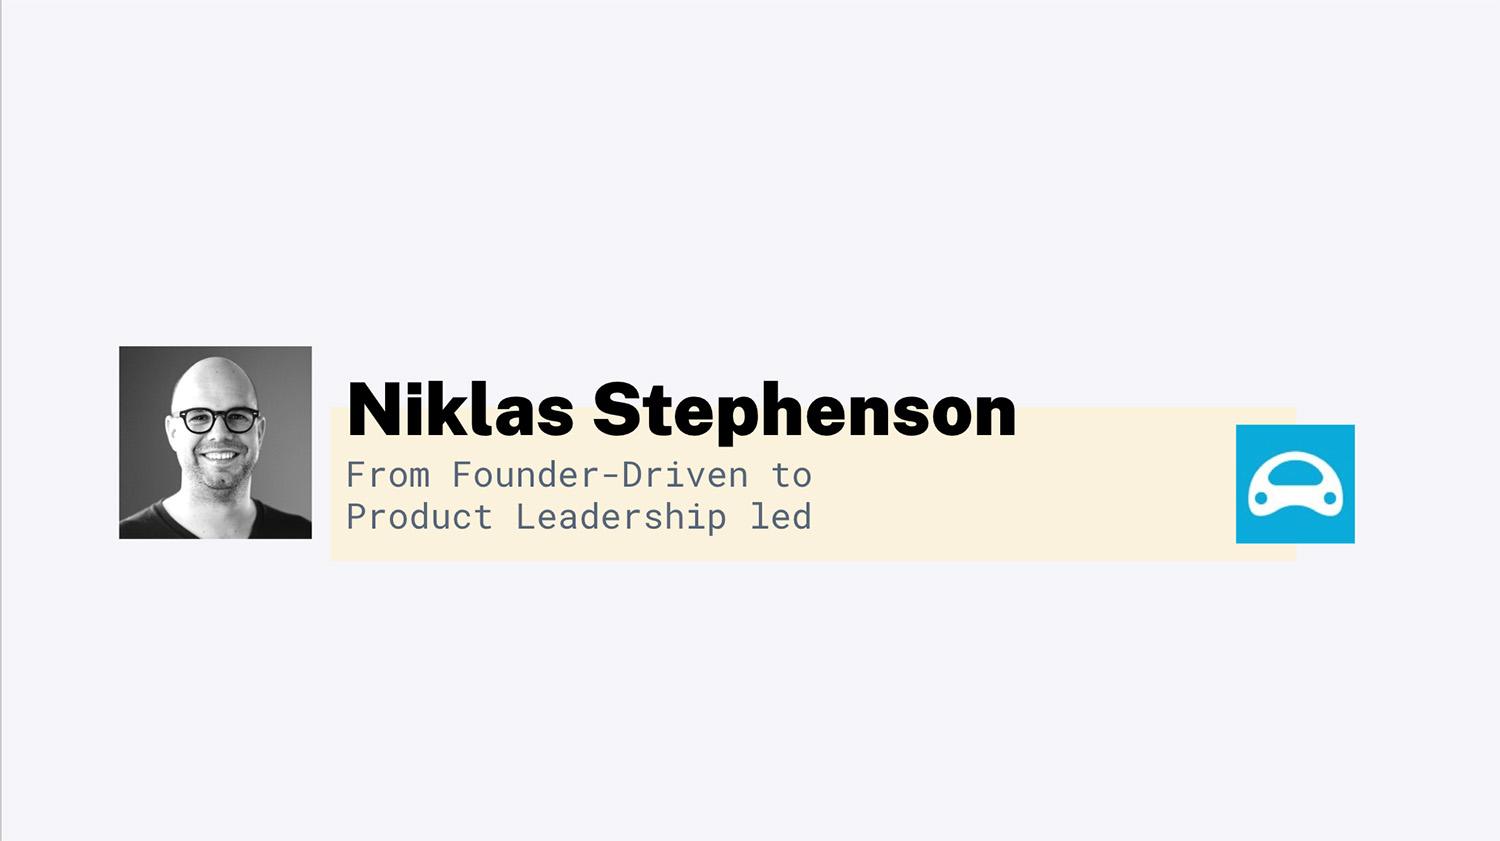 From Founder-Driven to Product Leadership Led